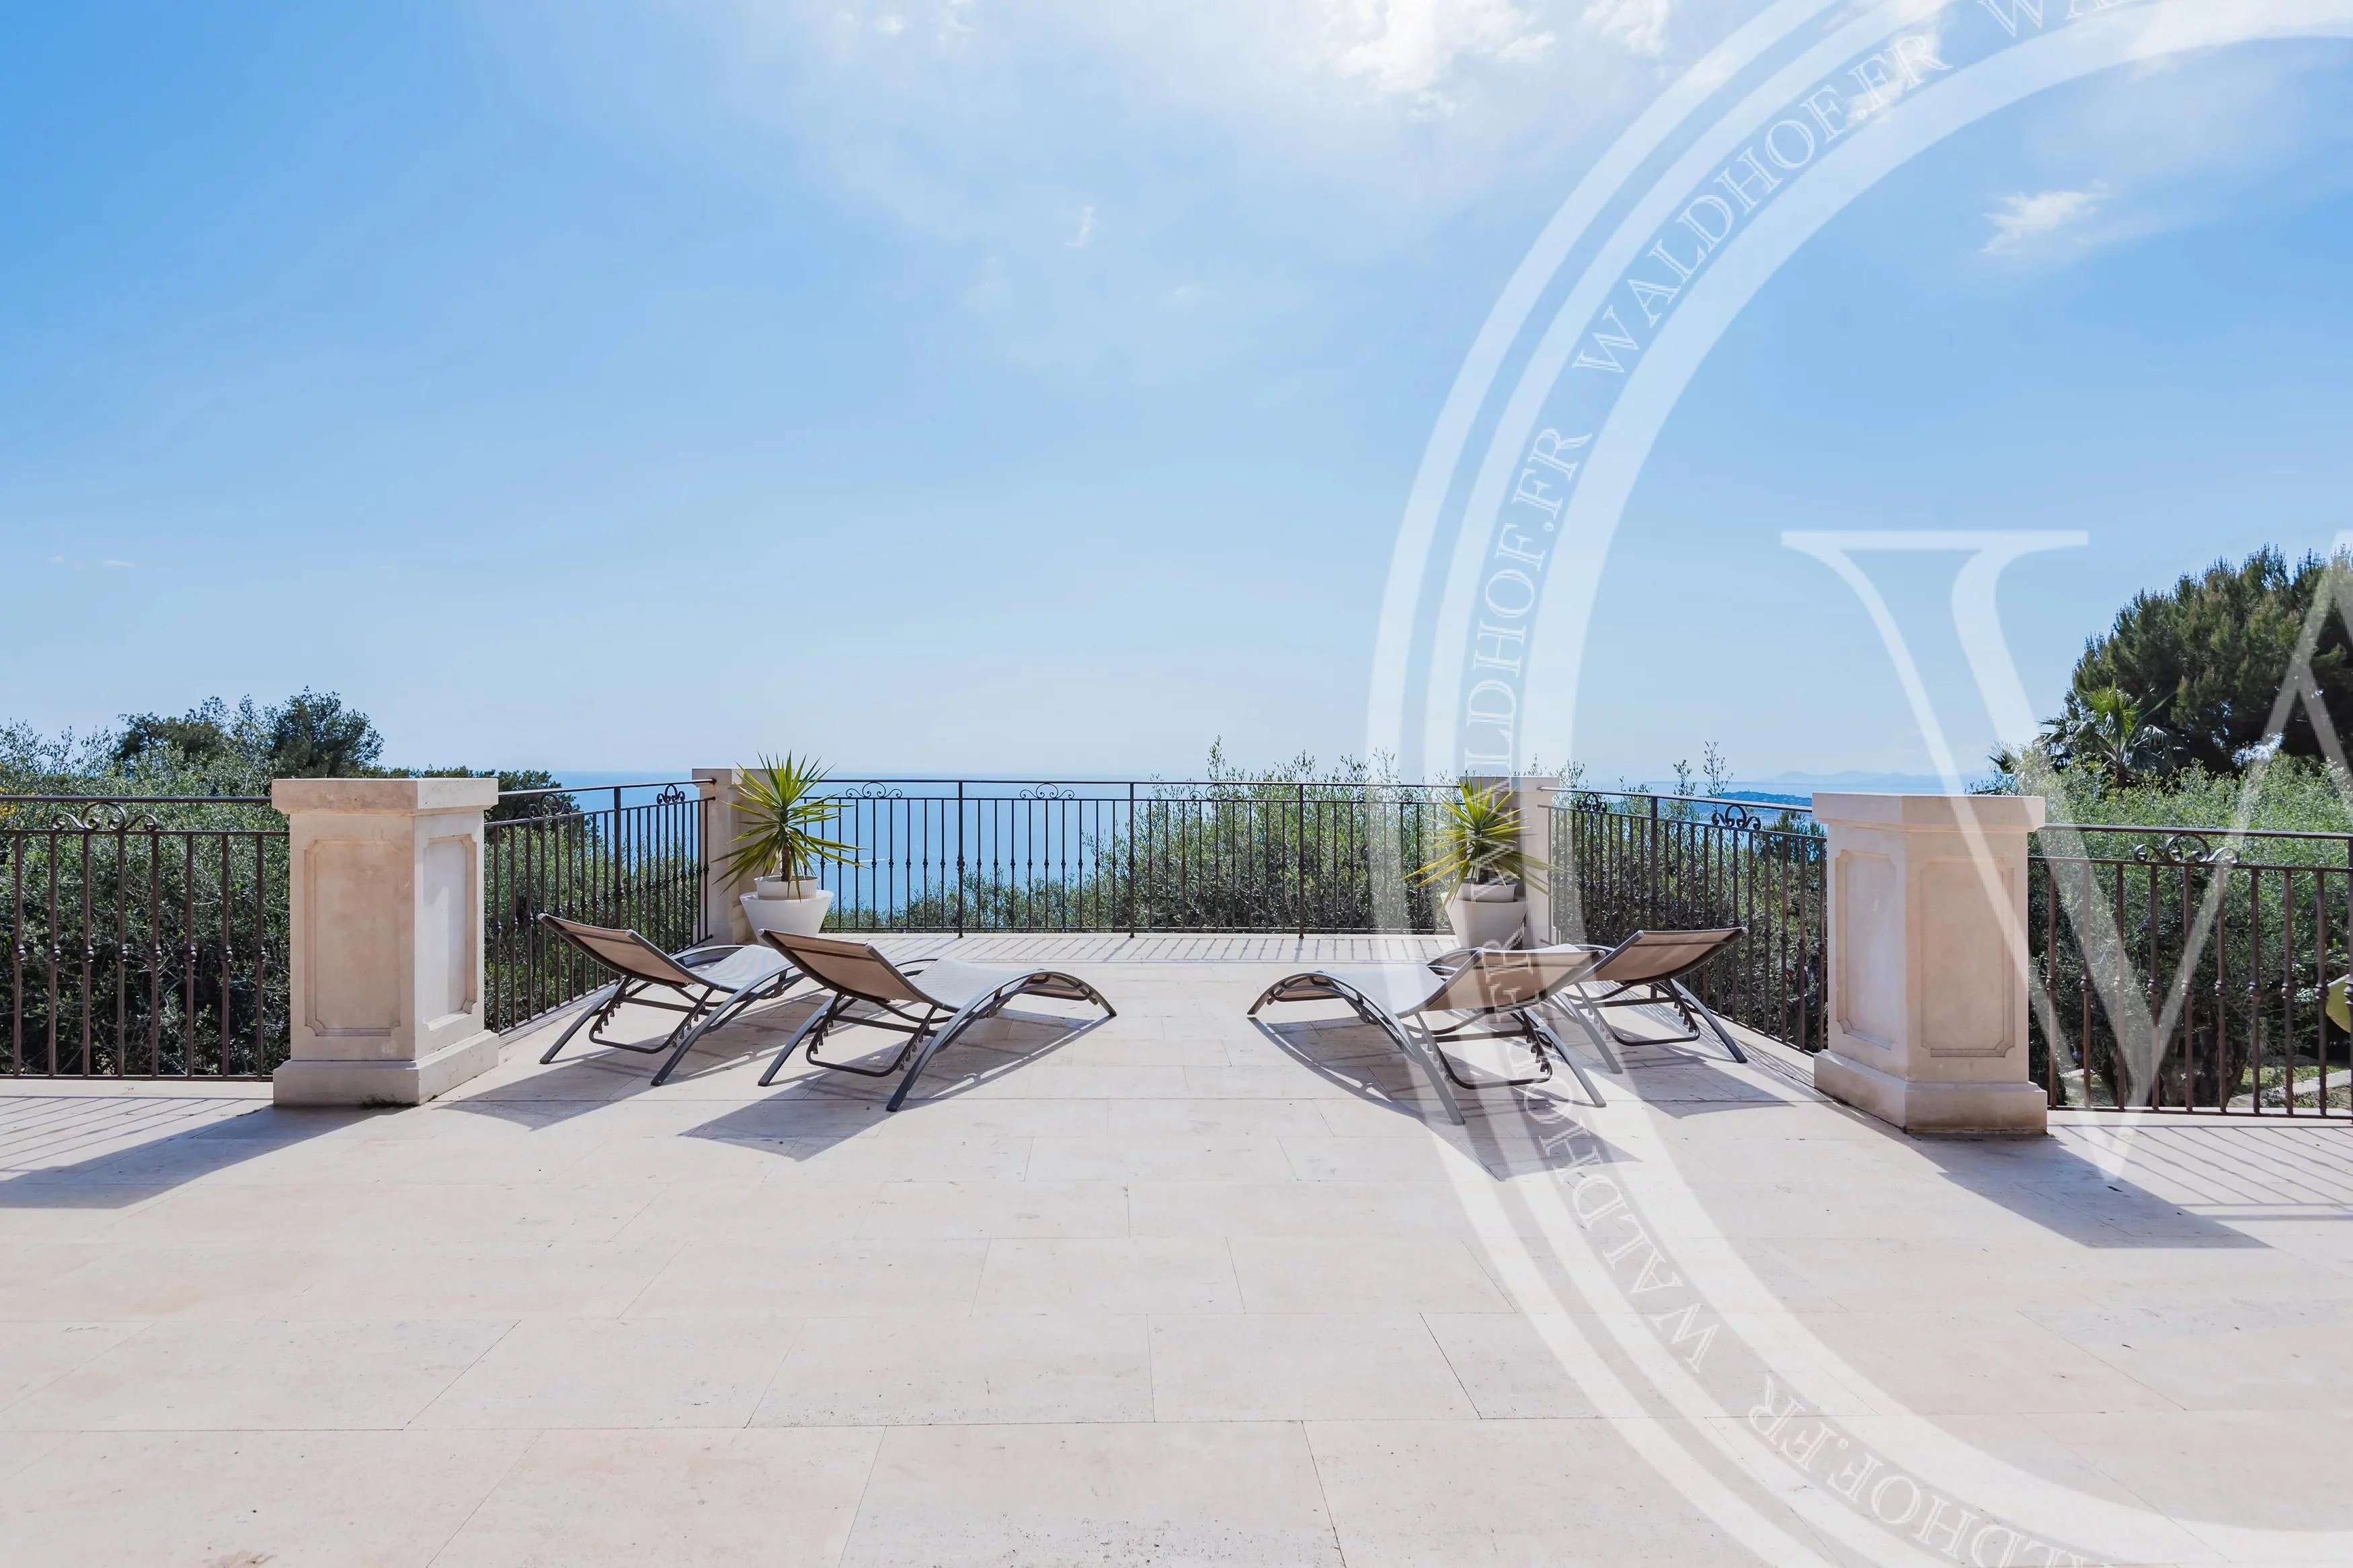 7 bedroom villa with exceptional panoramic view – CAP-D’AIL